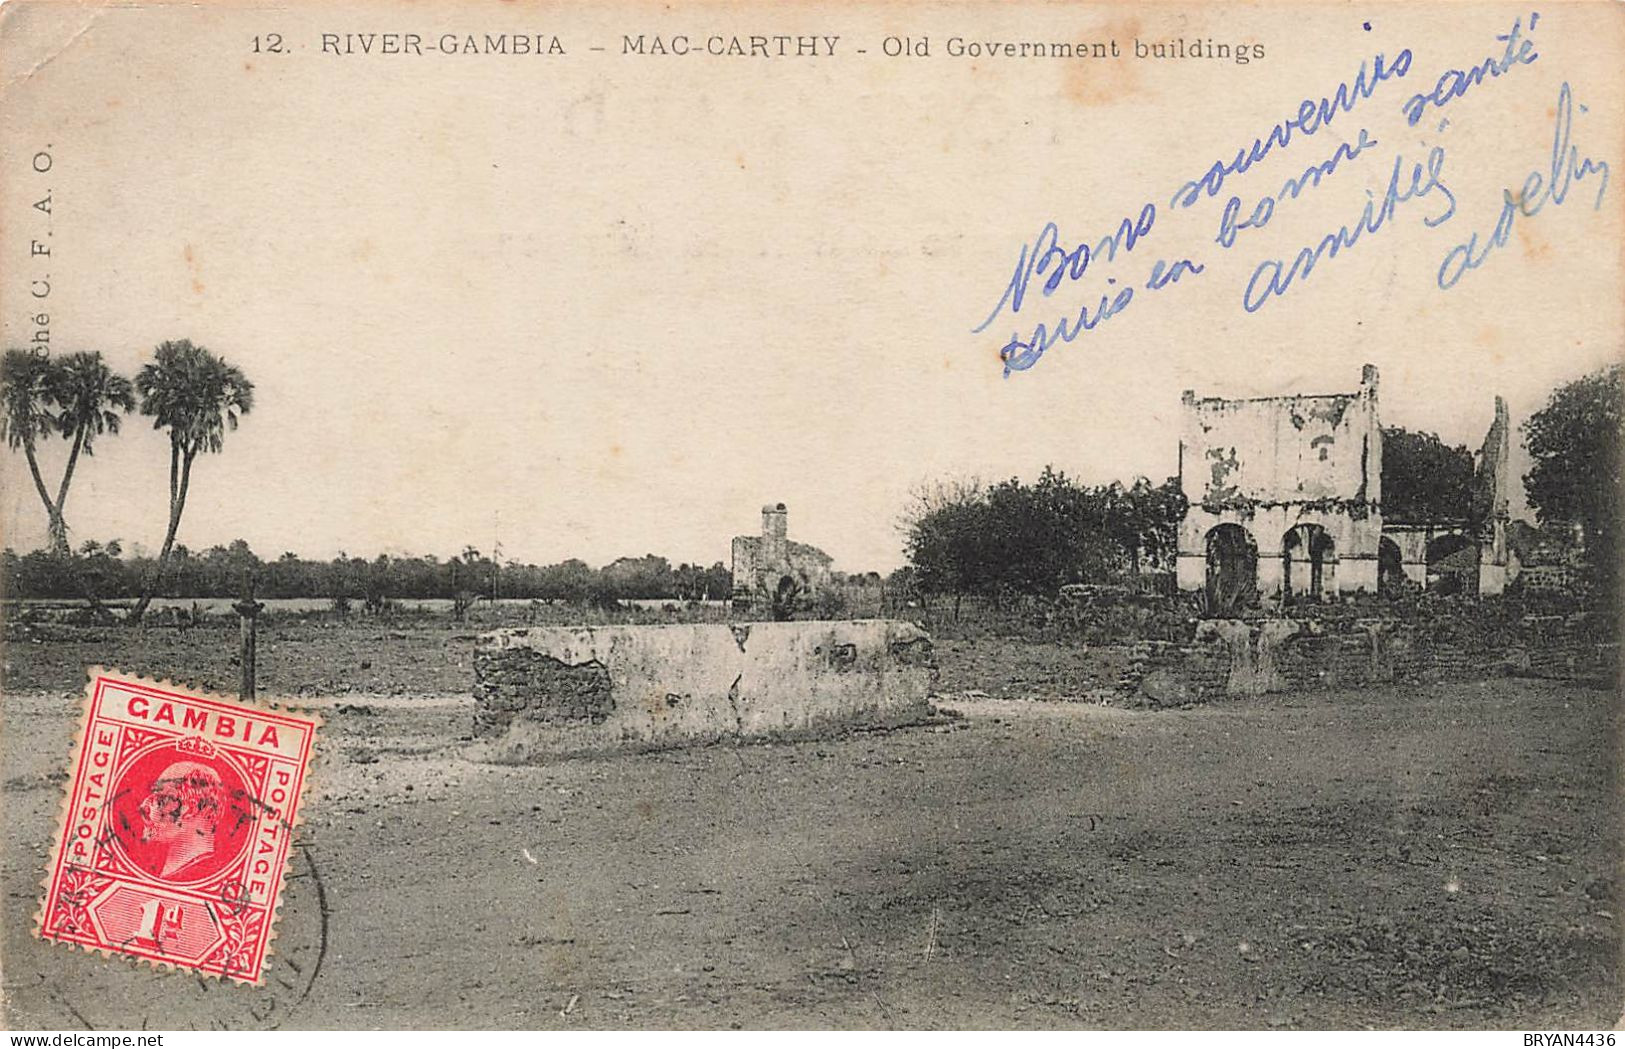 GAMBIE - MAC-CARTHY - (GAMBIA RIVER) - MACARTY SQUARE - OLD GOVERNEMENT BUILDINGS - Gambie